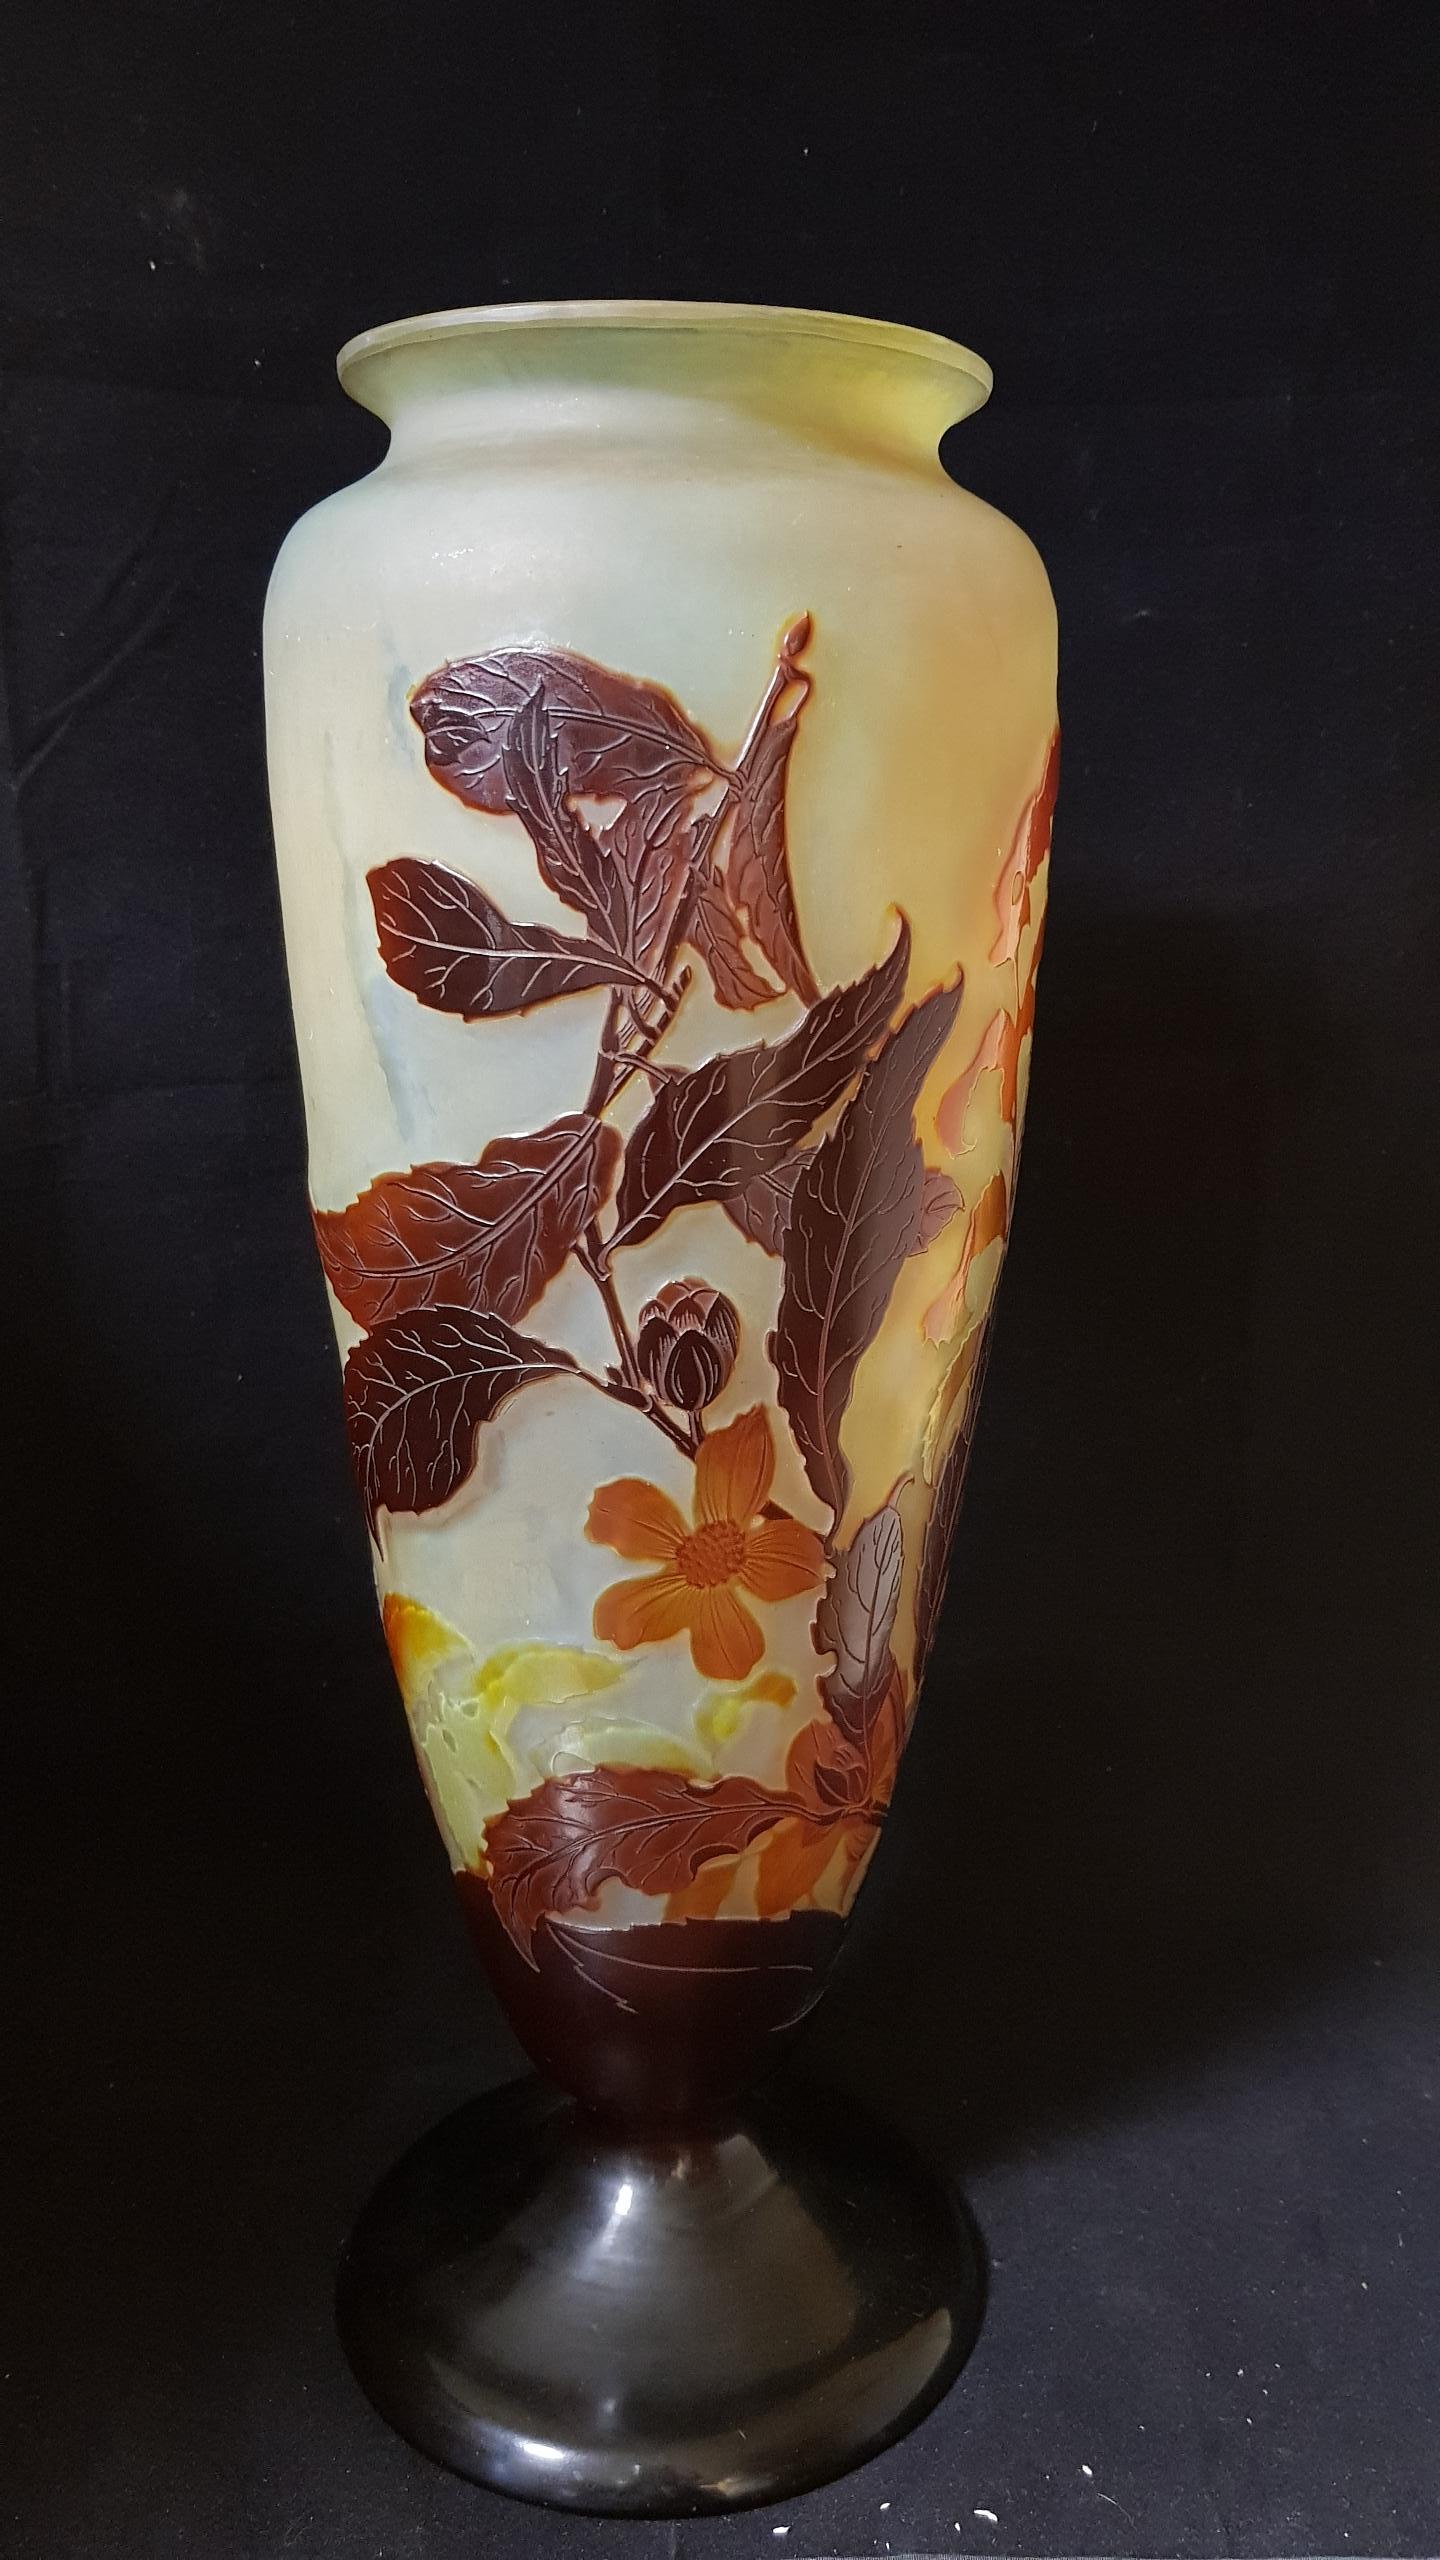 Emile Gallé, France, (early 1900): multi-layered glass vase with a light background and decoration with brown vegetable motifs
Signed.